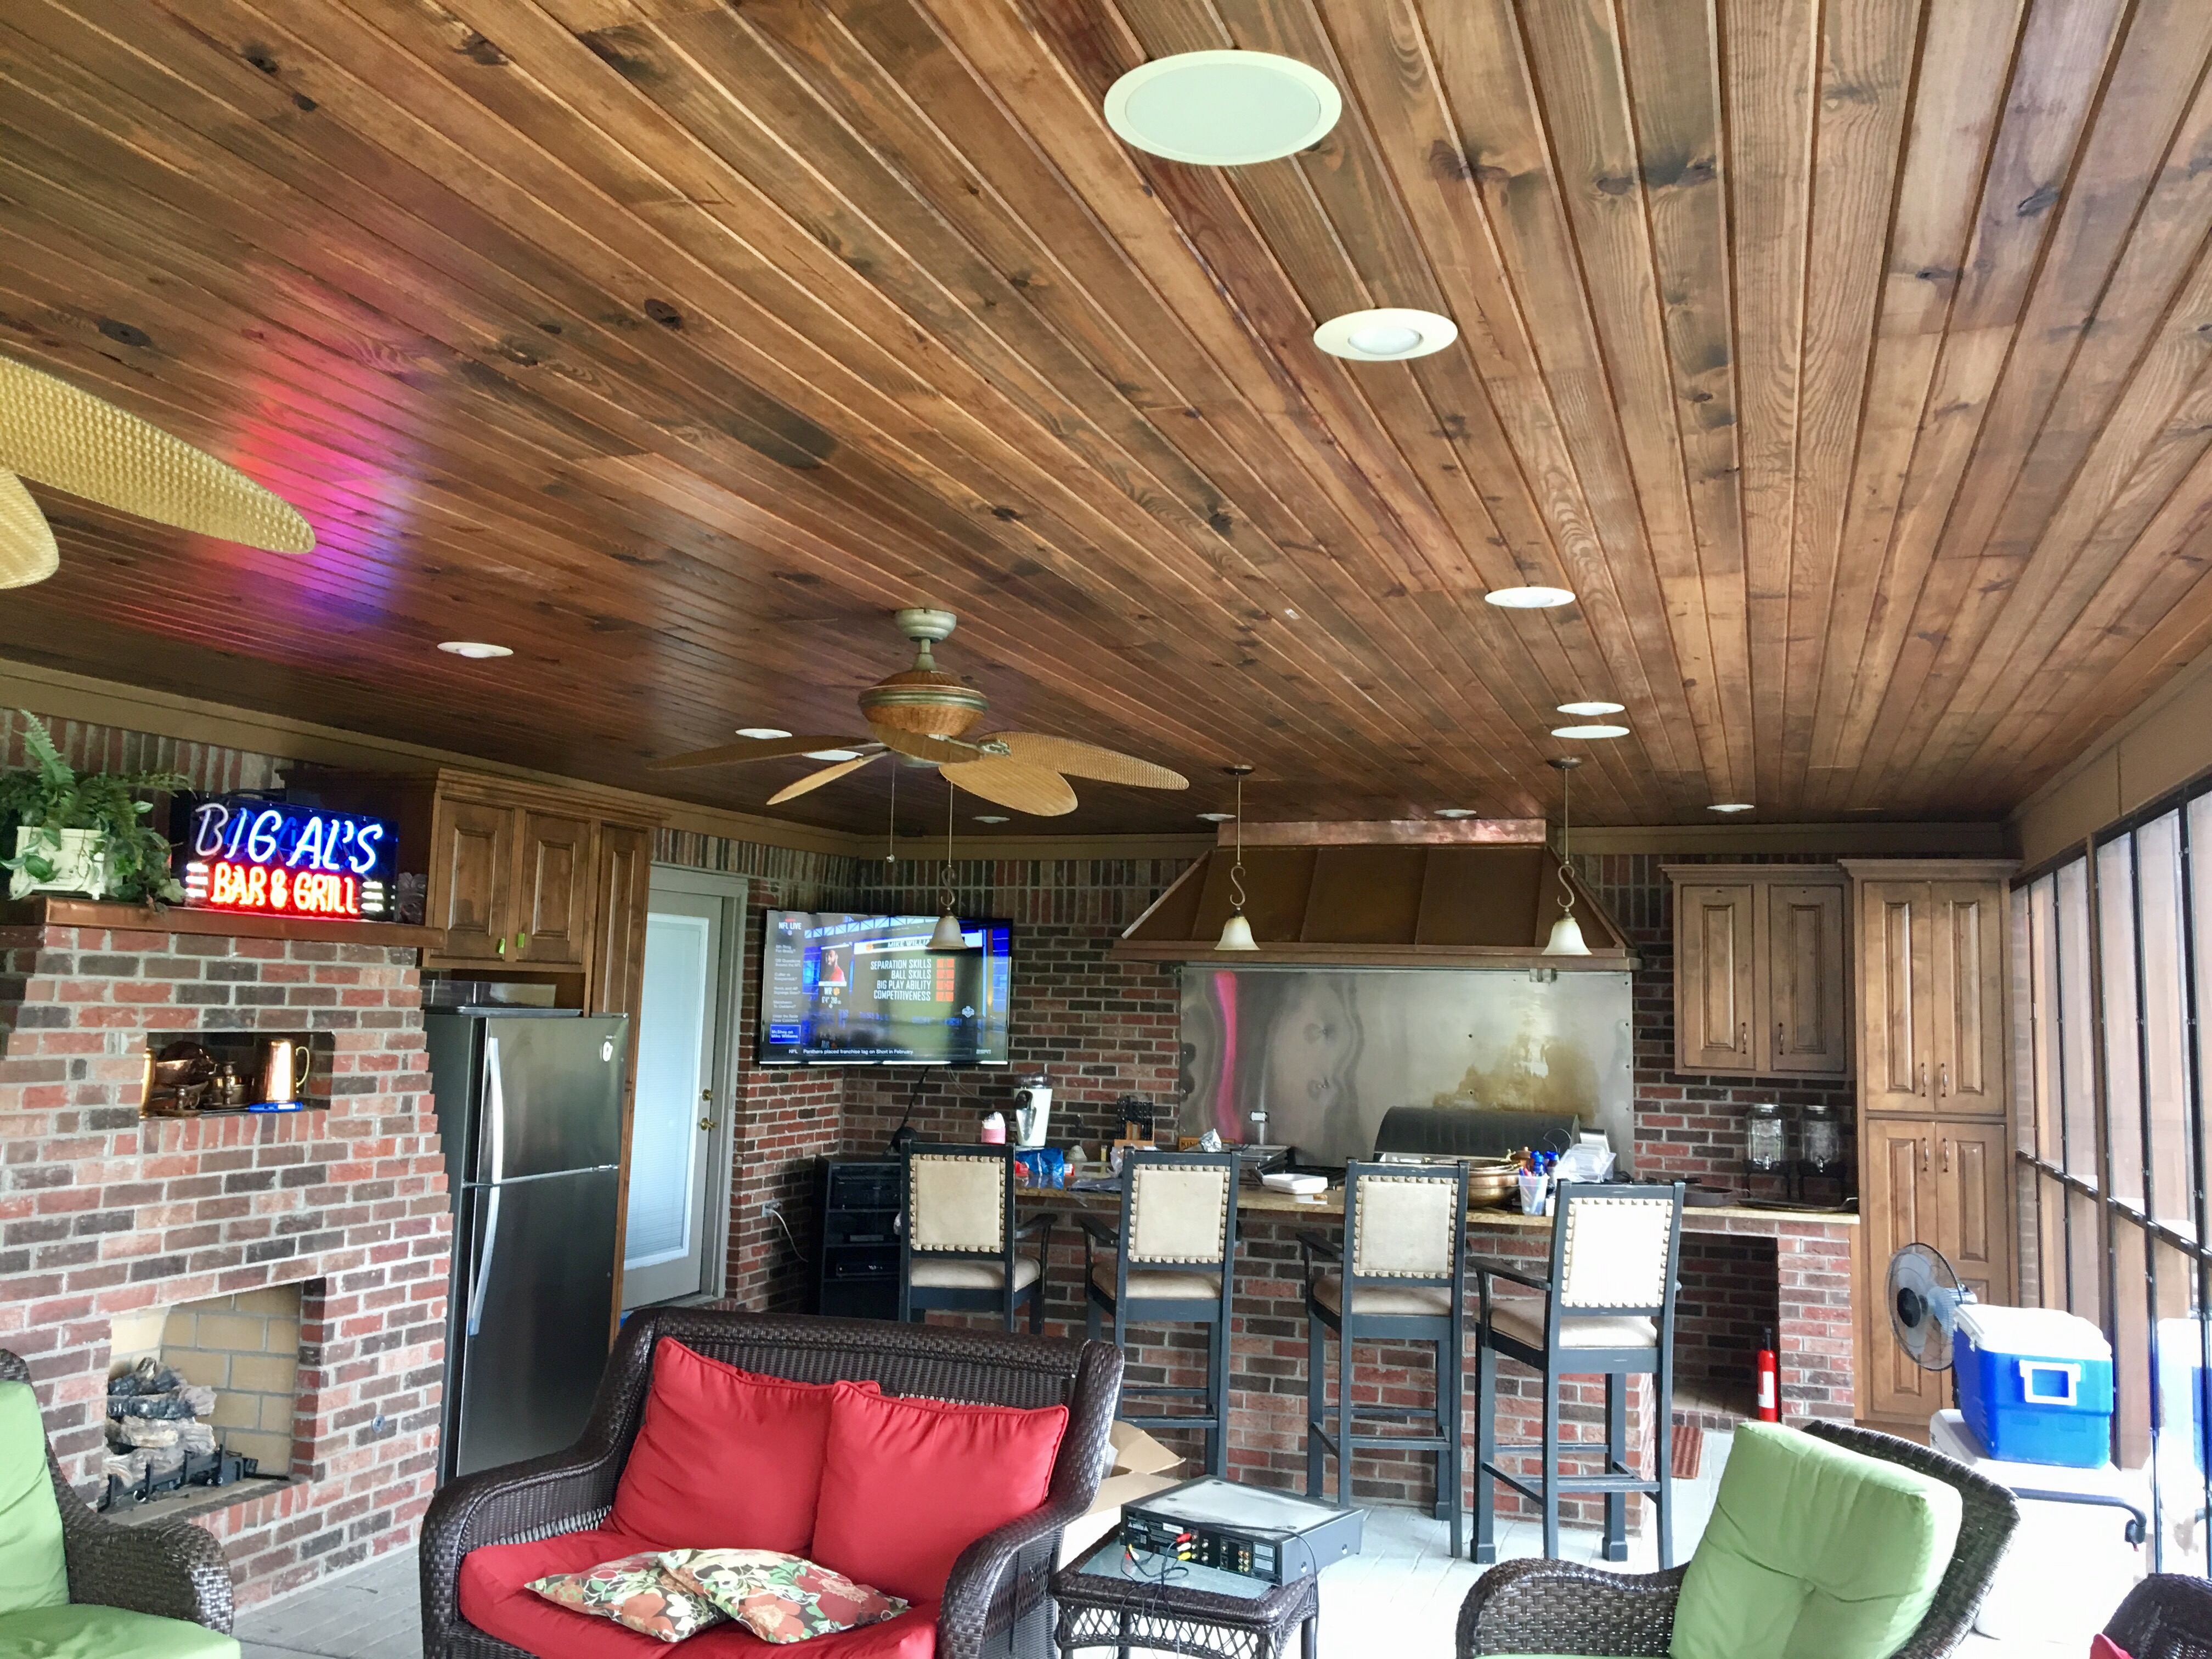 A Beautiful Sunroom Upgrade• Installed A Samsung Smart TV and Upgraded The Sound System!